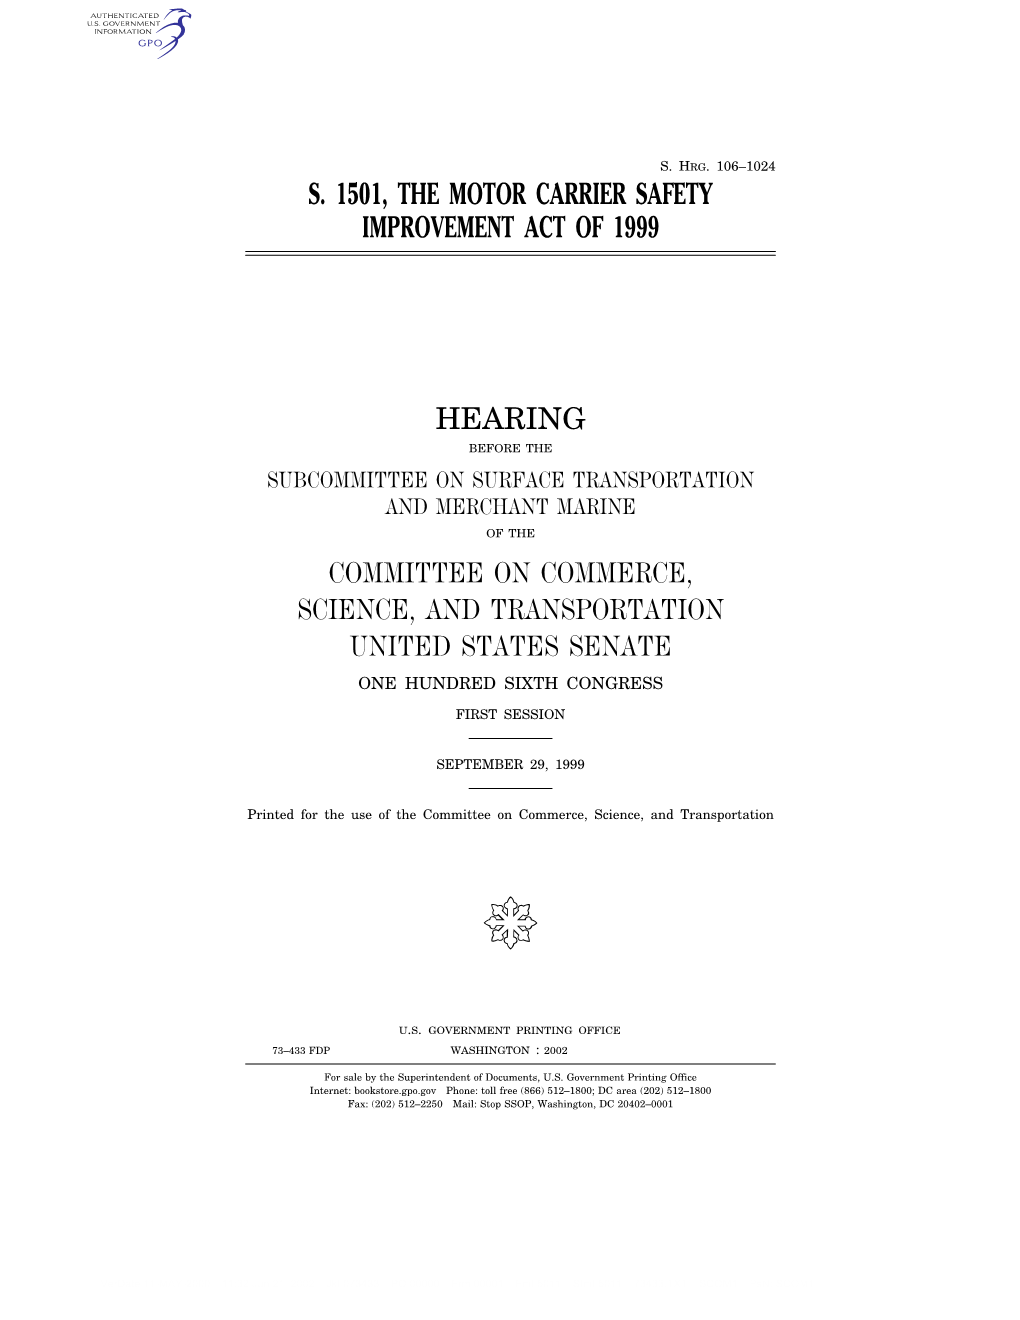 S. 1501, the Motor Carrier Safety Improvement Act of 1999 Hearing